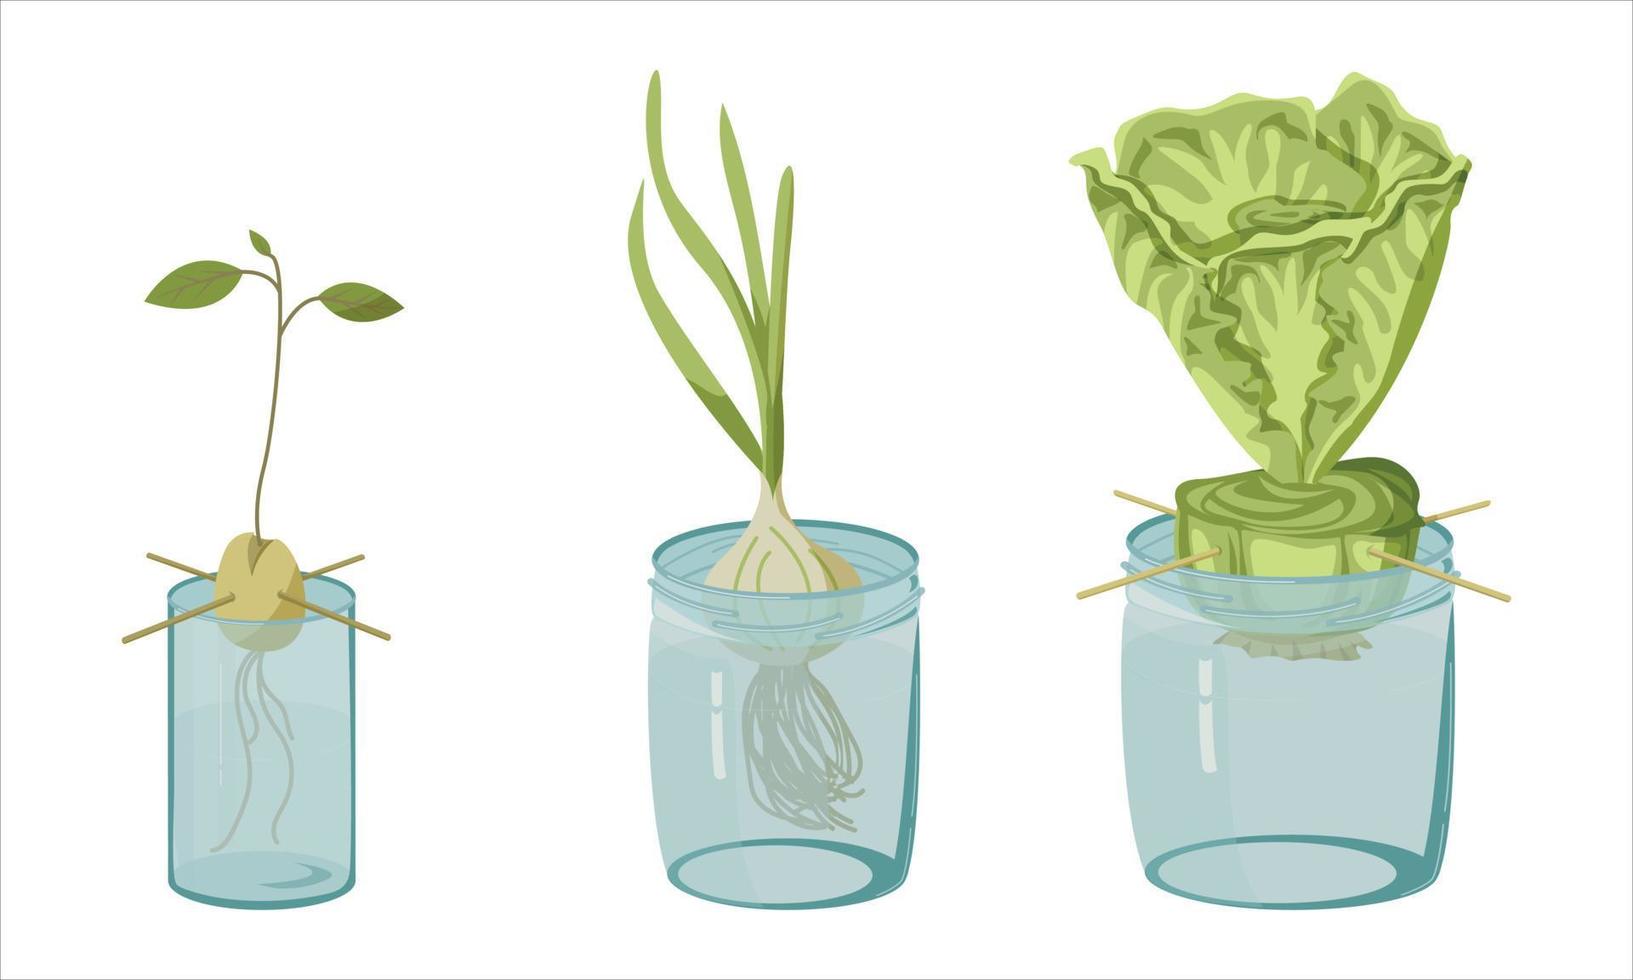 Plants for regrow from kitchen scraps on a white background. Avocado sprout, green onions, peking cabbage or grocery lettuce. EPS 10. vector